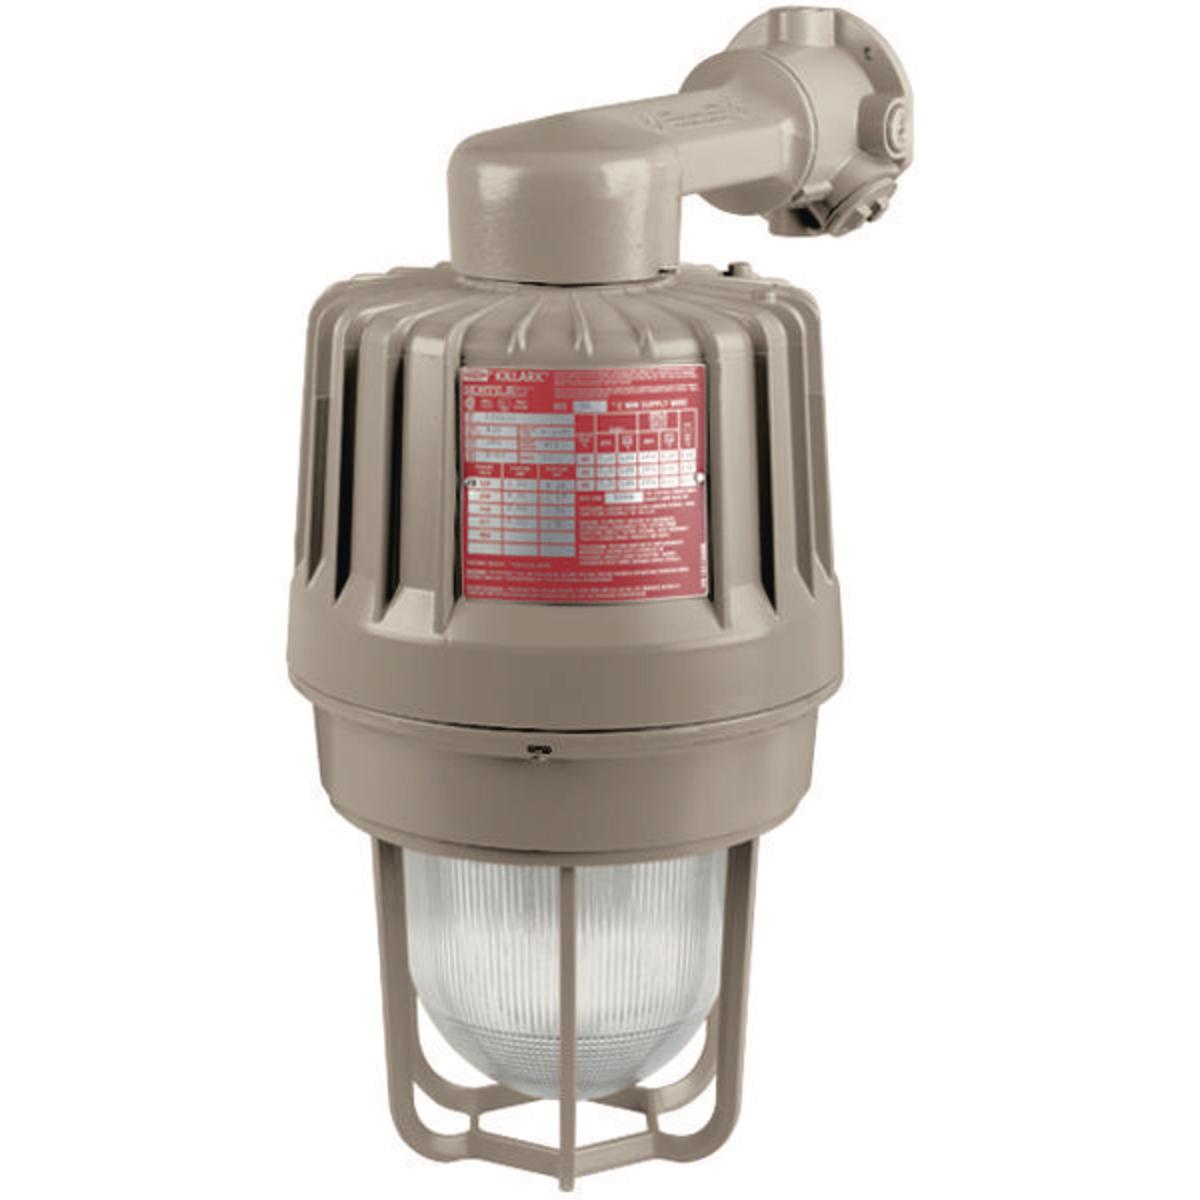 Hubbell EZP250B2G 250W Quadri-Volt Pulse-Start Metal Halide 3/4" Wall Mount with Guard  ; Three light sources – High Pressure Sodium (50-400W), Metal Halide (70-400W) and Pulse Start Metal Halide (175-400W) ; Mounting choice –Pendant, ceiling, 25˚ stanchion or 90˚ wall mou